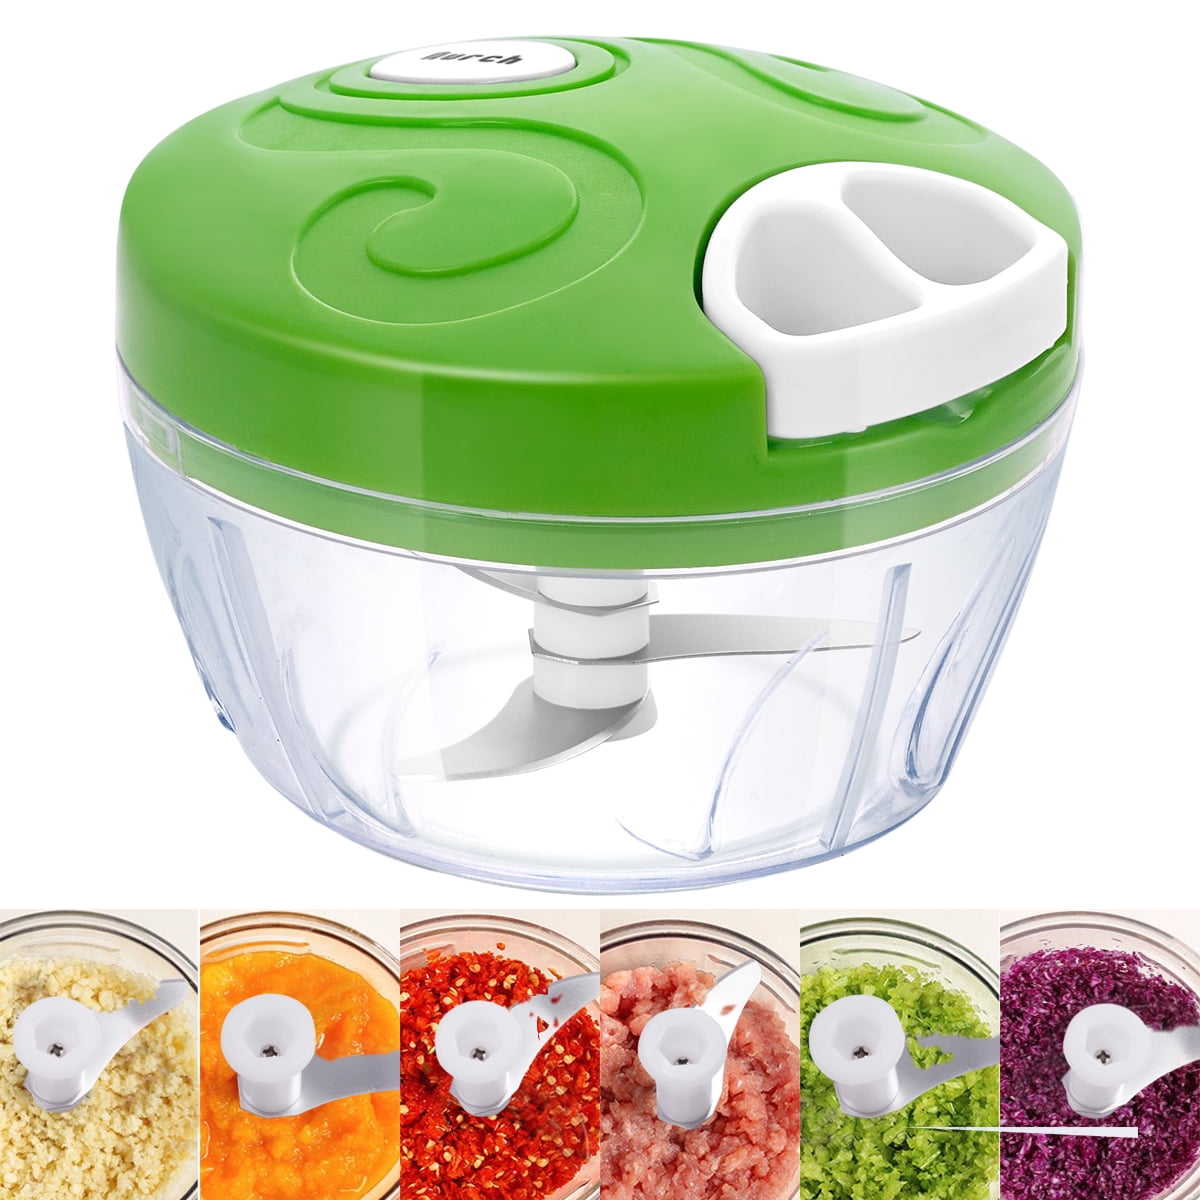 Manual Vegetable Chopper with 5 Blades, Easy Hand Pull String Mincer Cutter  for Veggies, Onion, Ginger, Fruits, Egg Whisk, Smoothie Blender, and